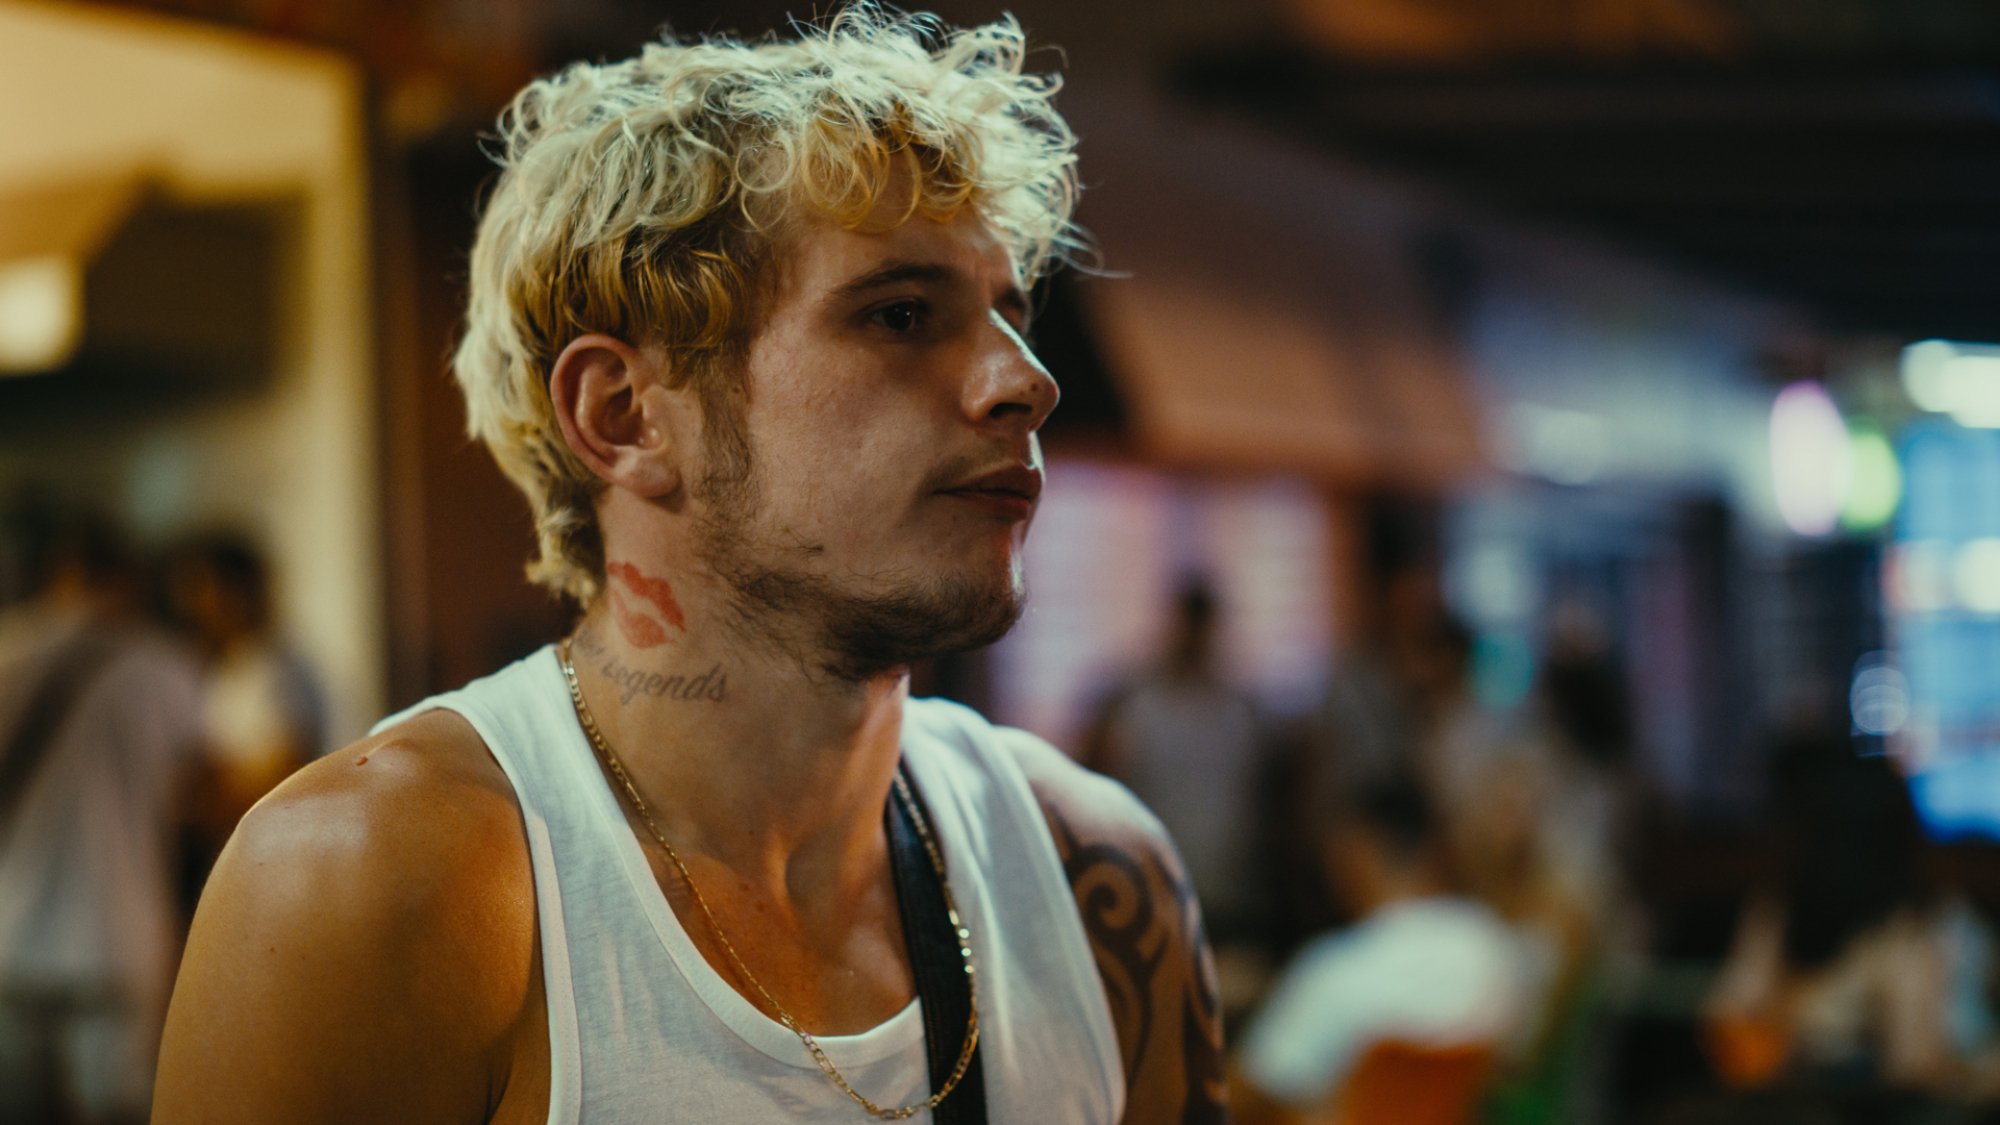 A teen boy with bleached hair and a neck tattoo of a lipstick mark looks concerned.